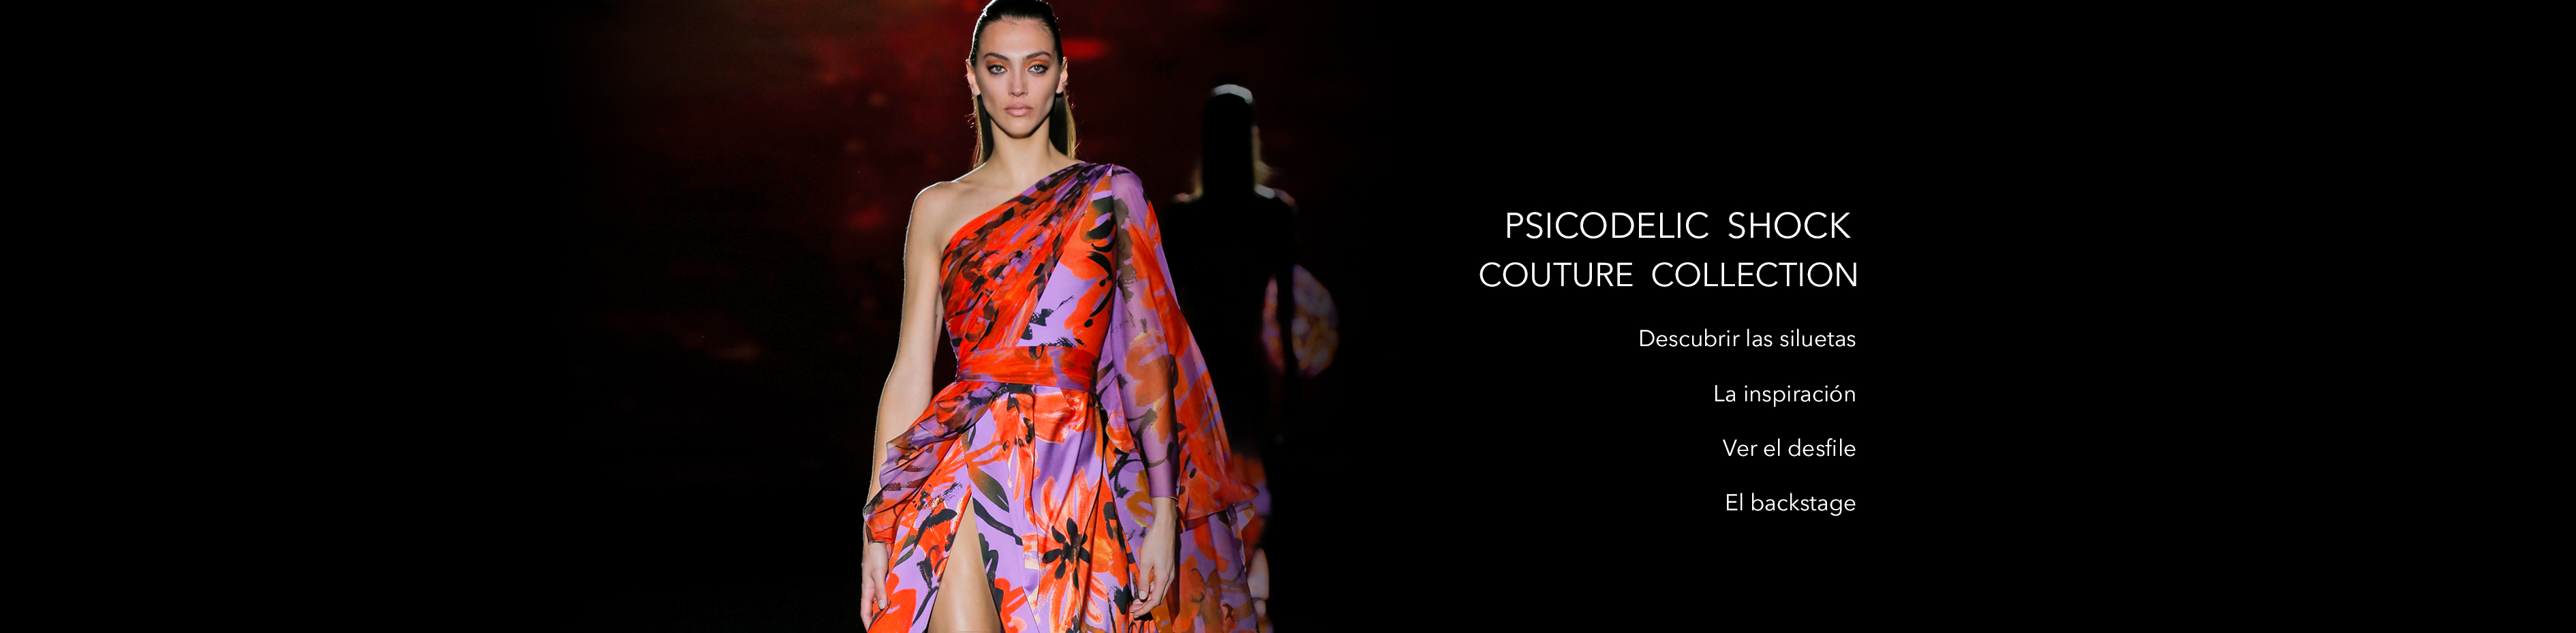 PSICODELIC SHOCK / COUTURE COLLECTION